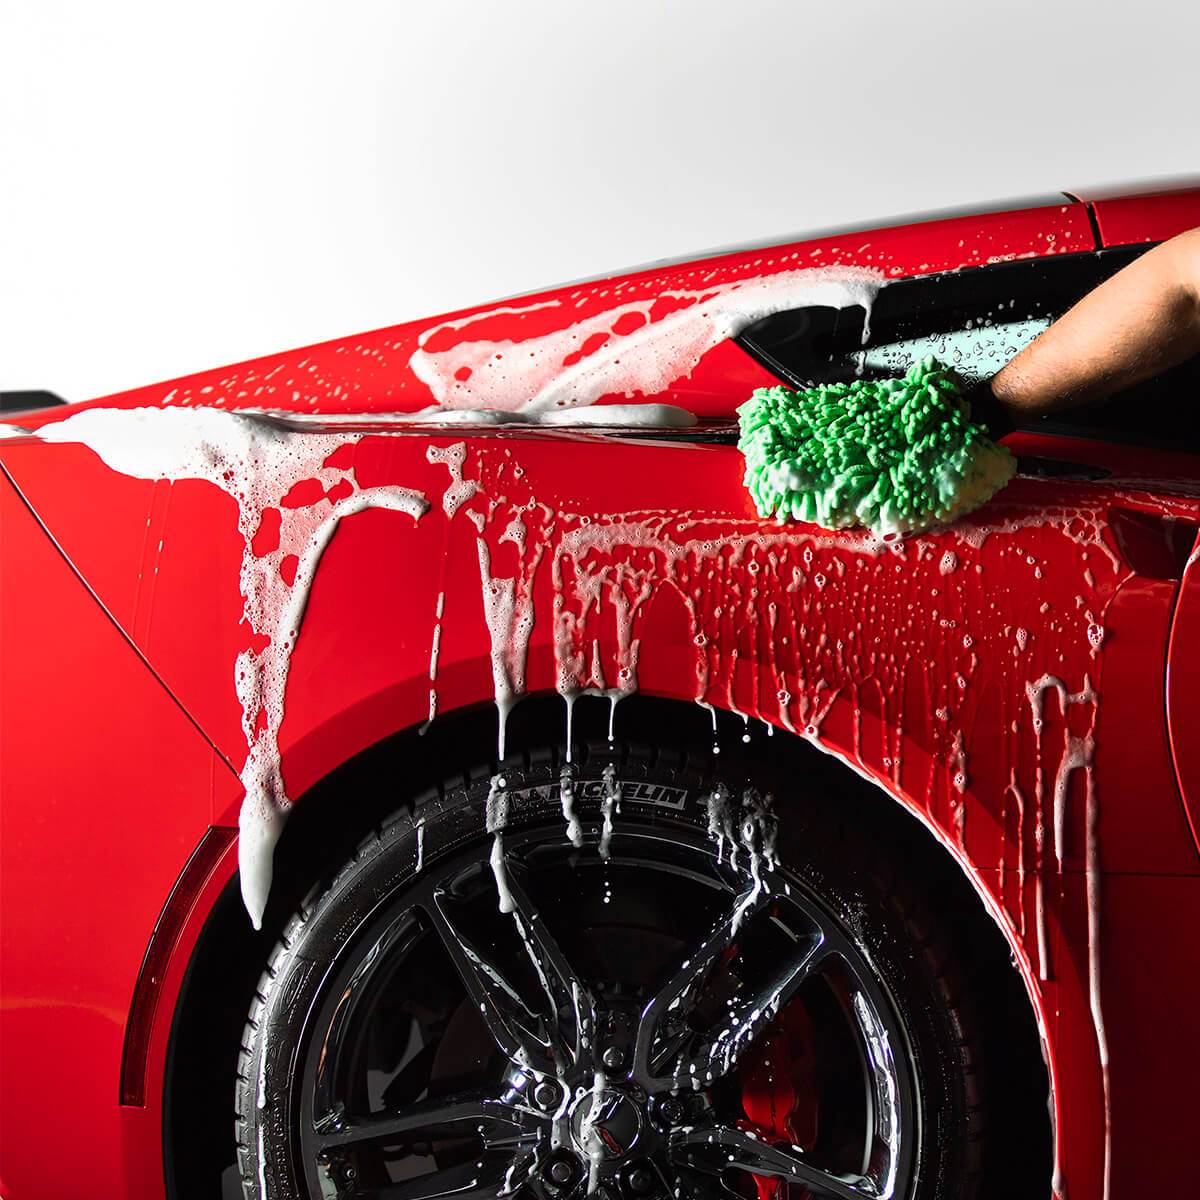 Why You Shouldn't Use Dish Soap To Wash Your Car